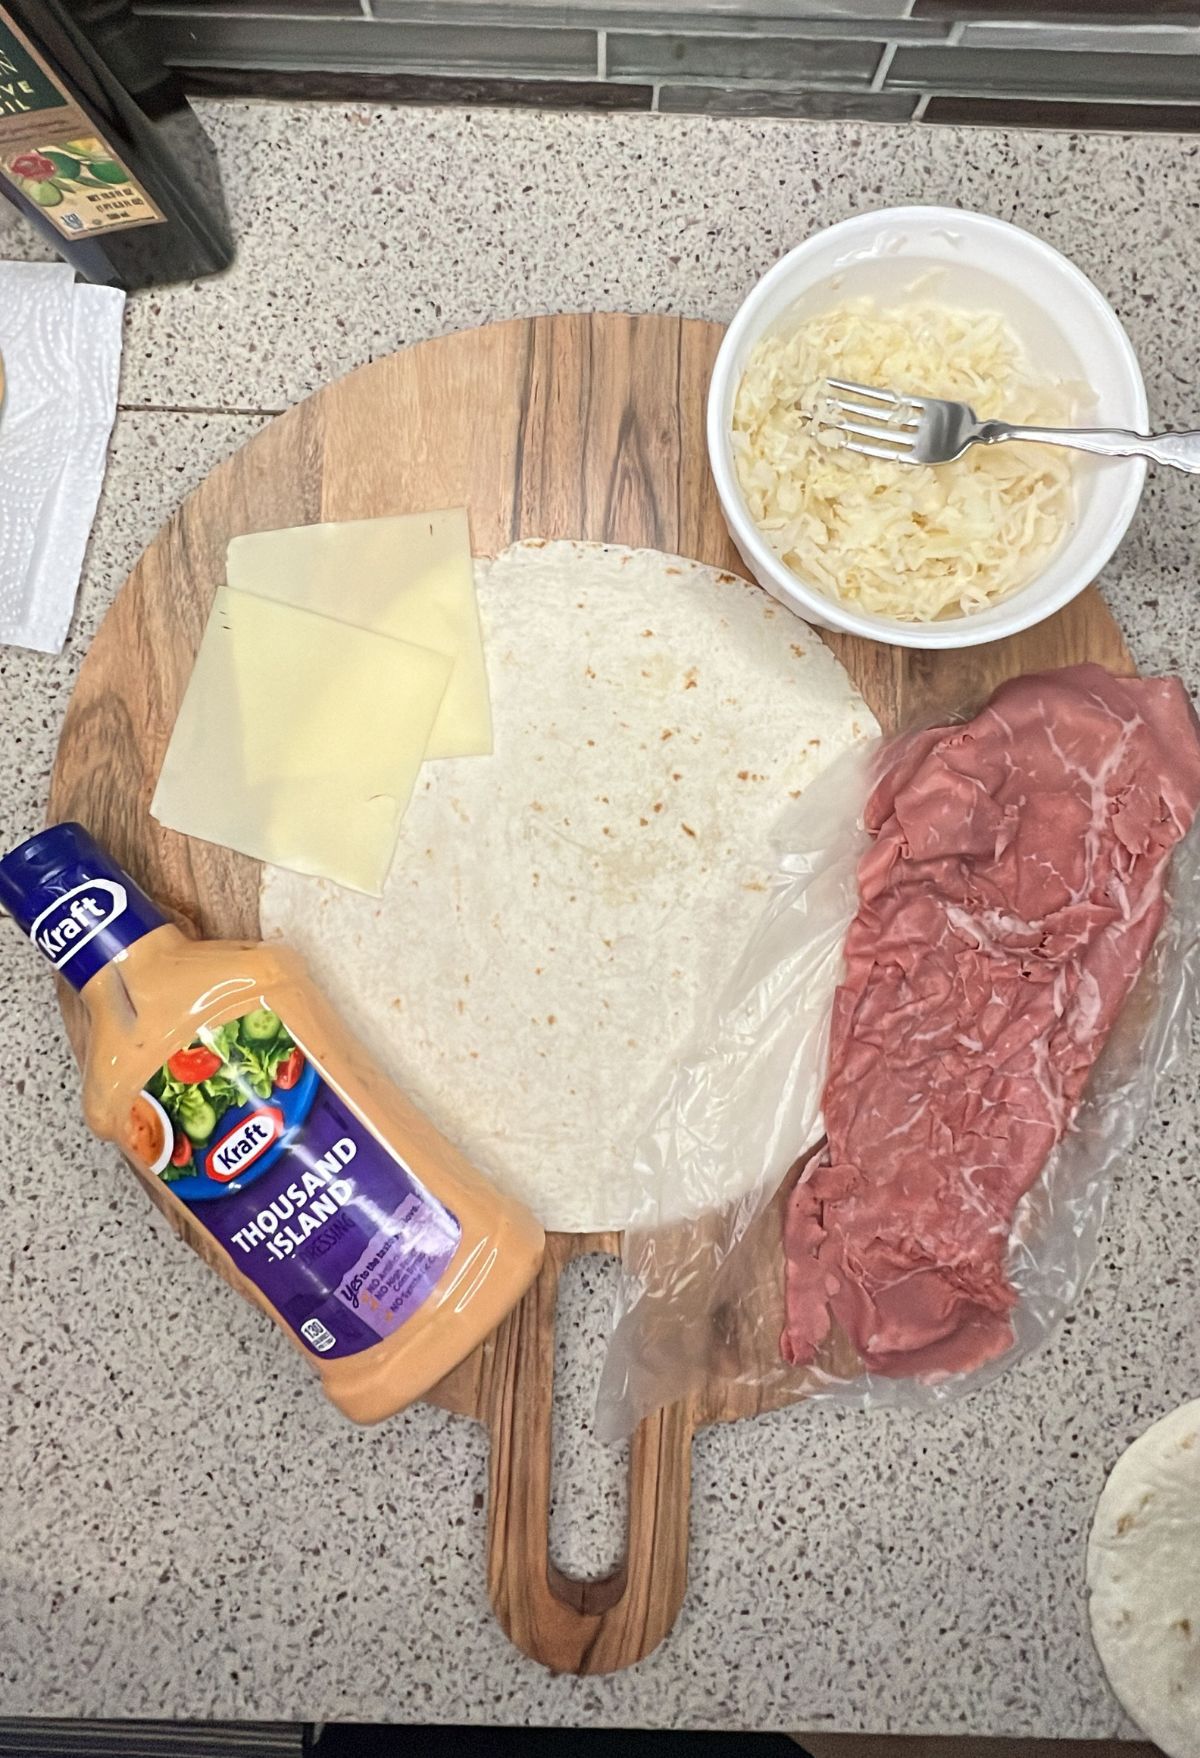 Ingredients for a meal laid out on a cutting board, including sliced beef, cheese slices, tortillas, mayonnaise, and noodles.